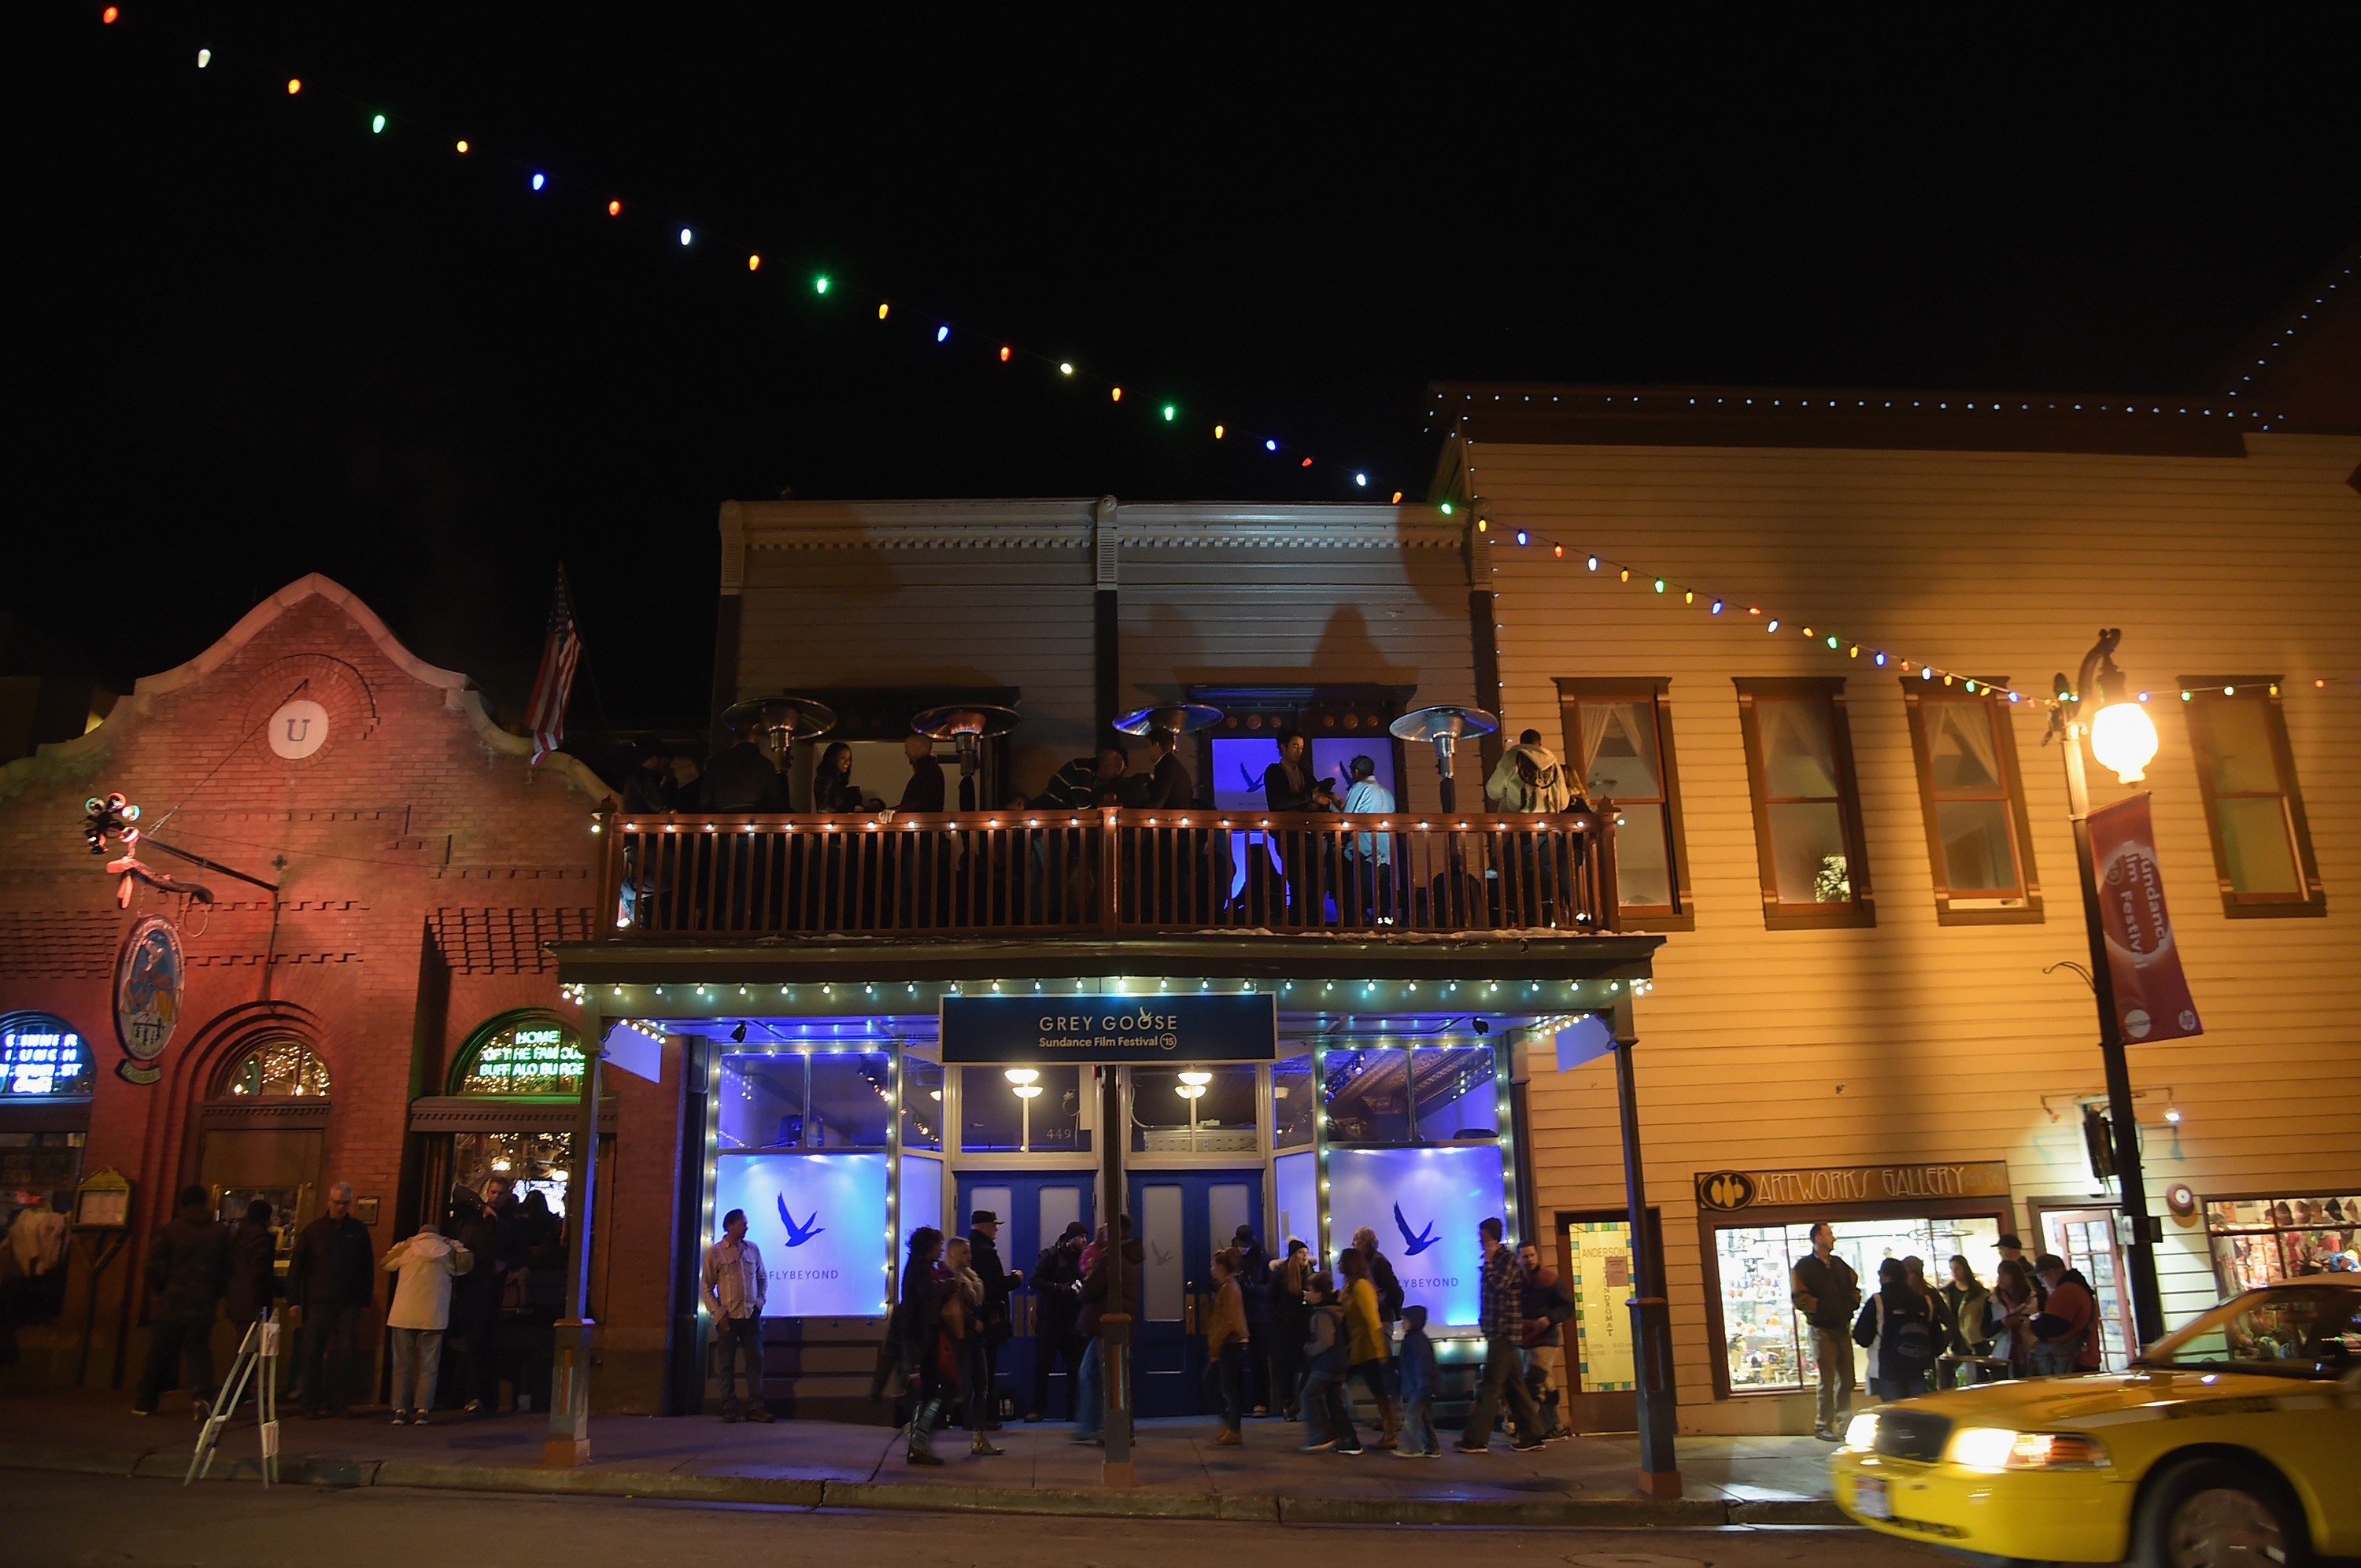 GREY GOOSE Blue Door Hosts "The Stanford Prison Experiment" Party At Sundance - 2015 Park City